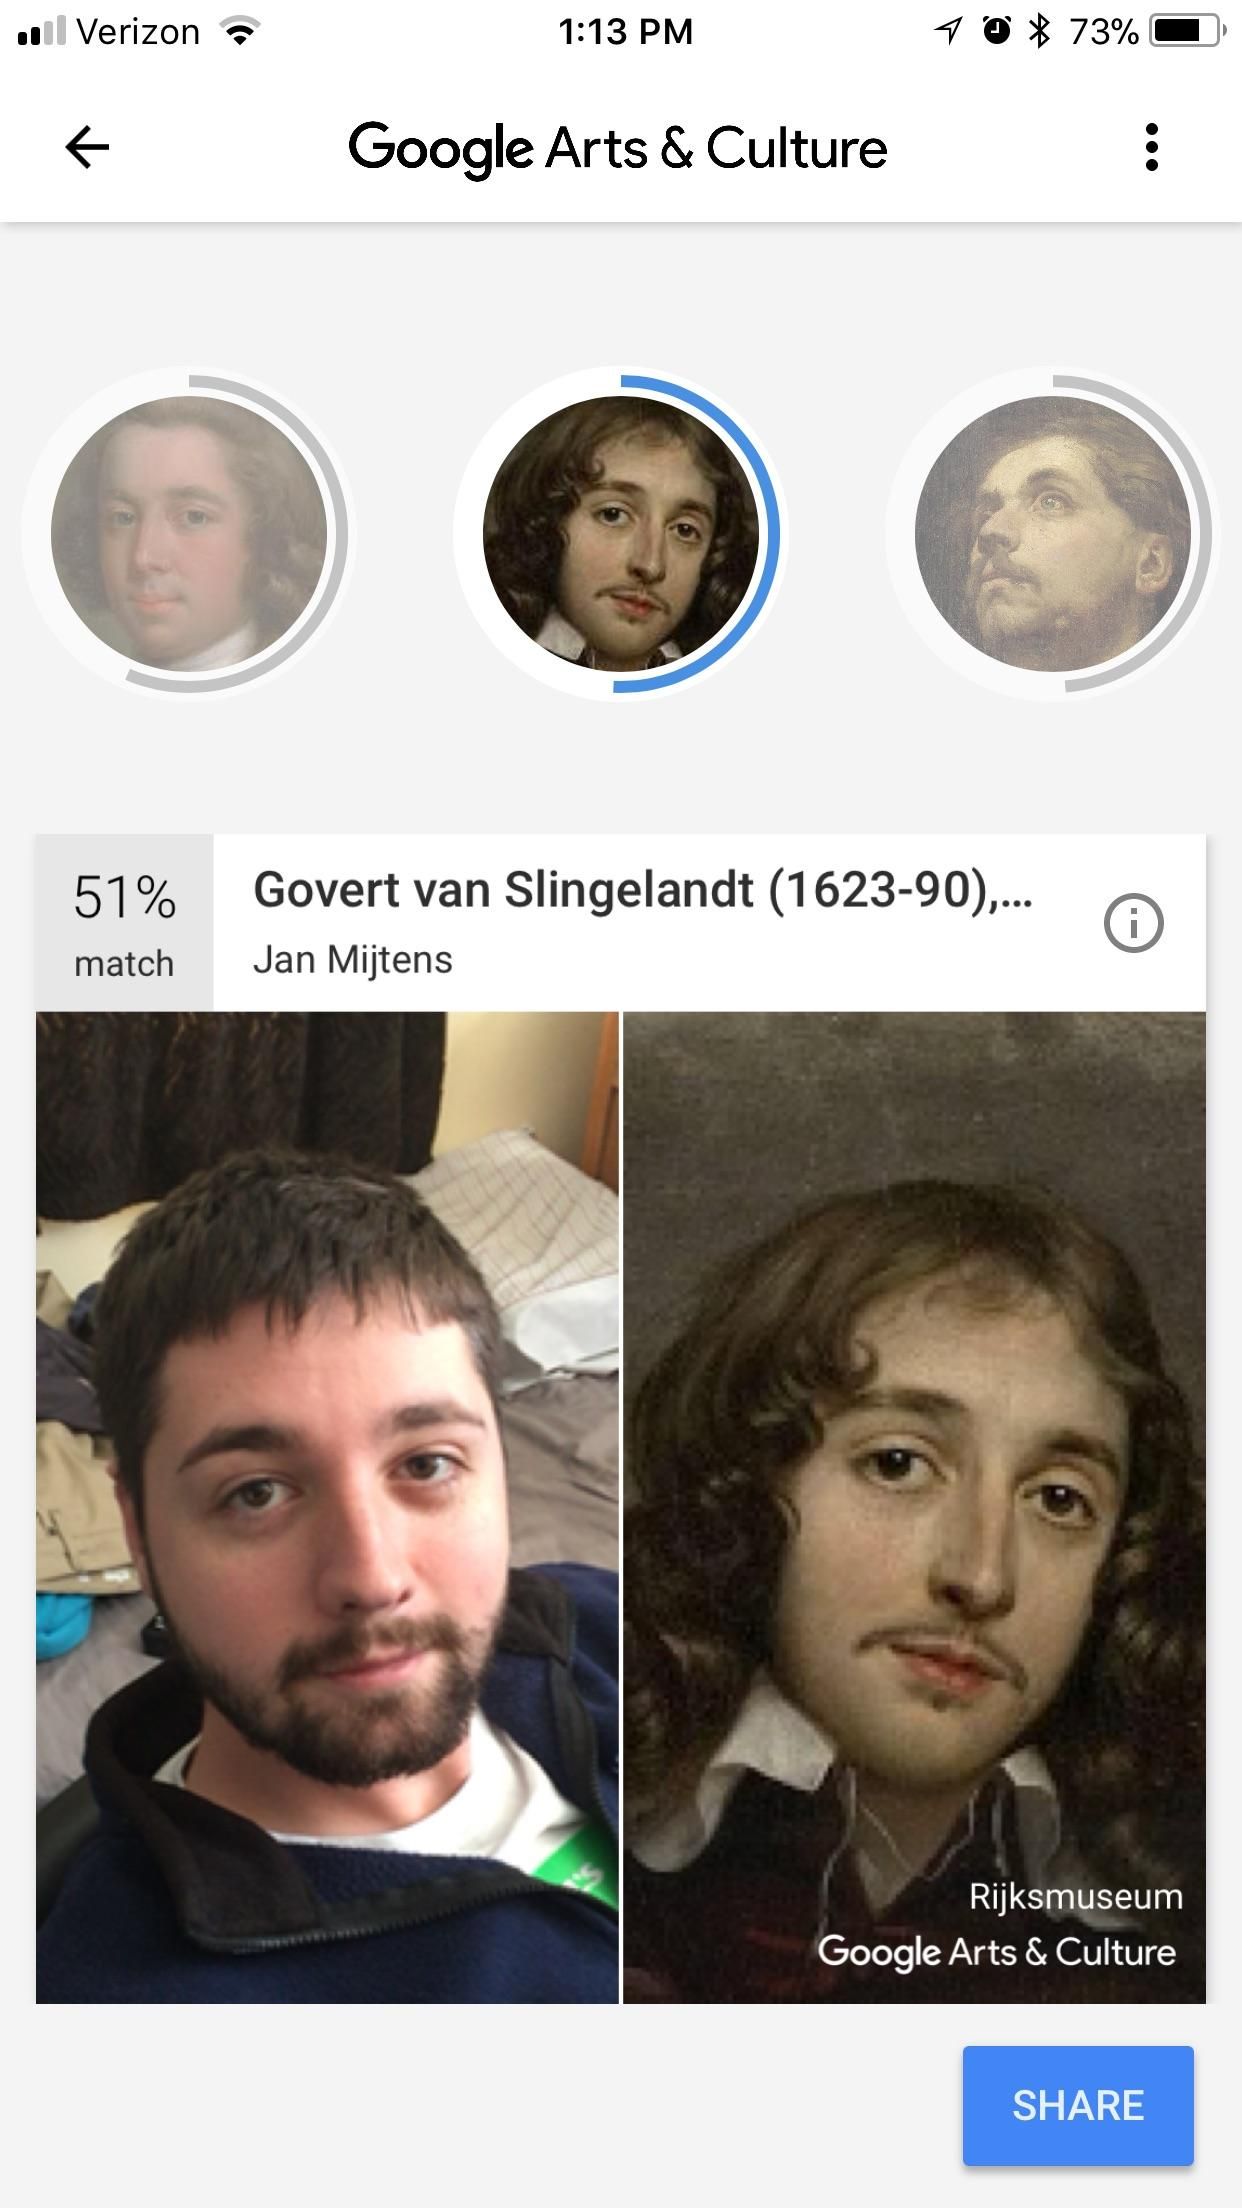 My sister downloaded this new app that takes your picture and compares it to old paintings and here what came up...